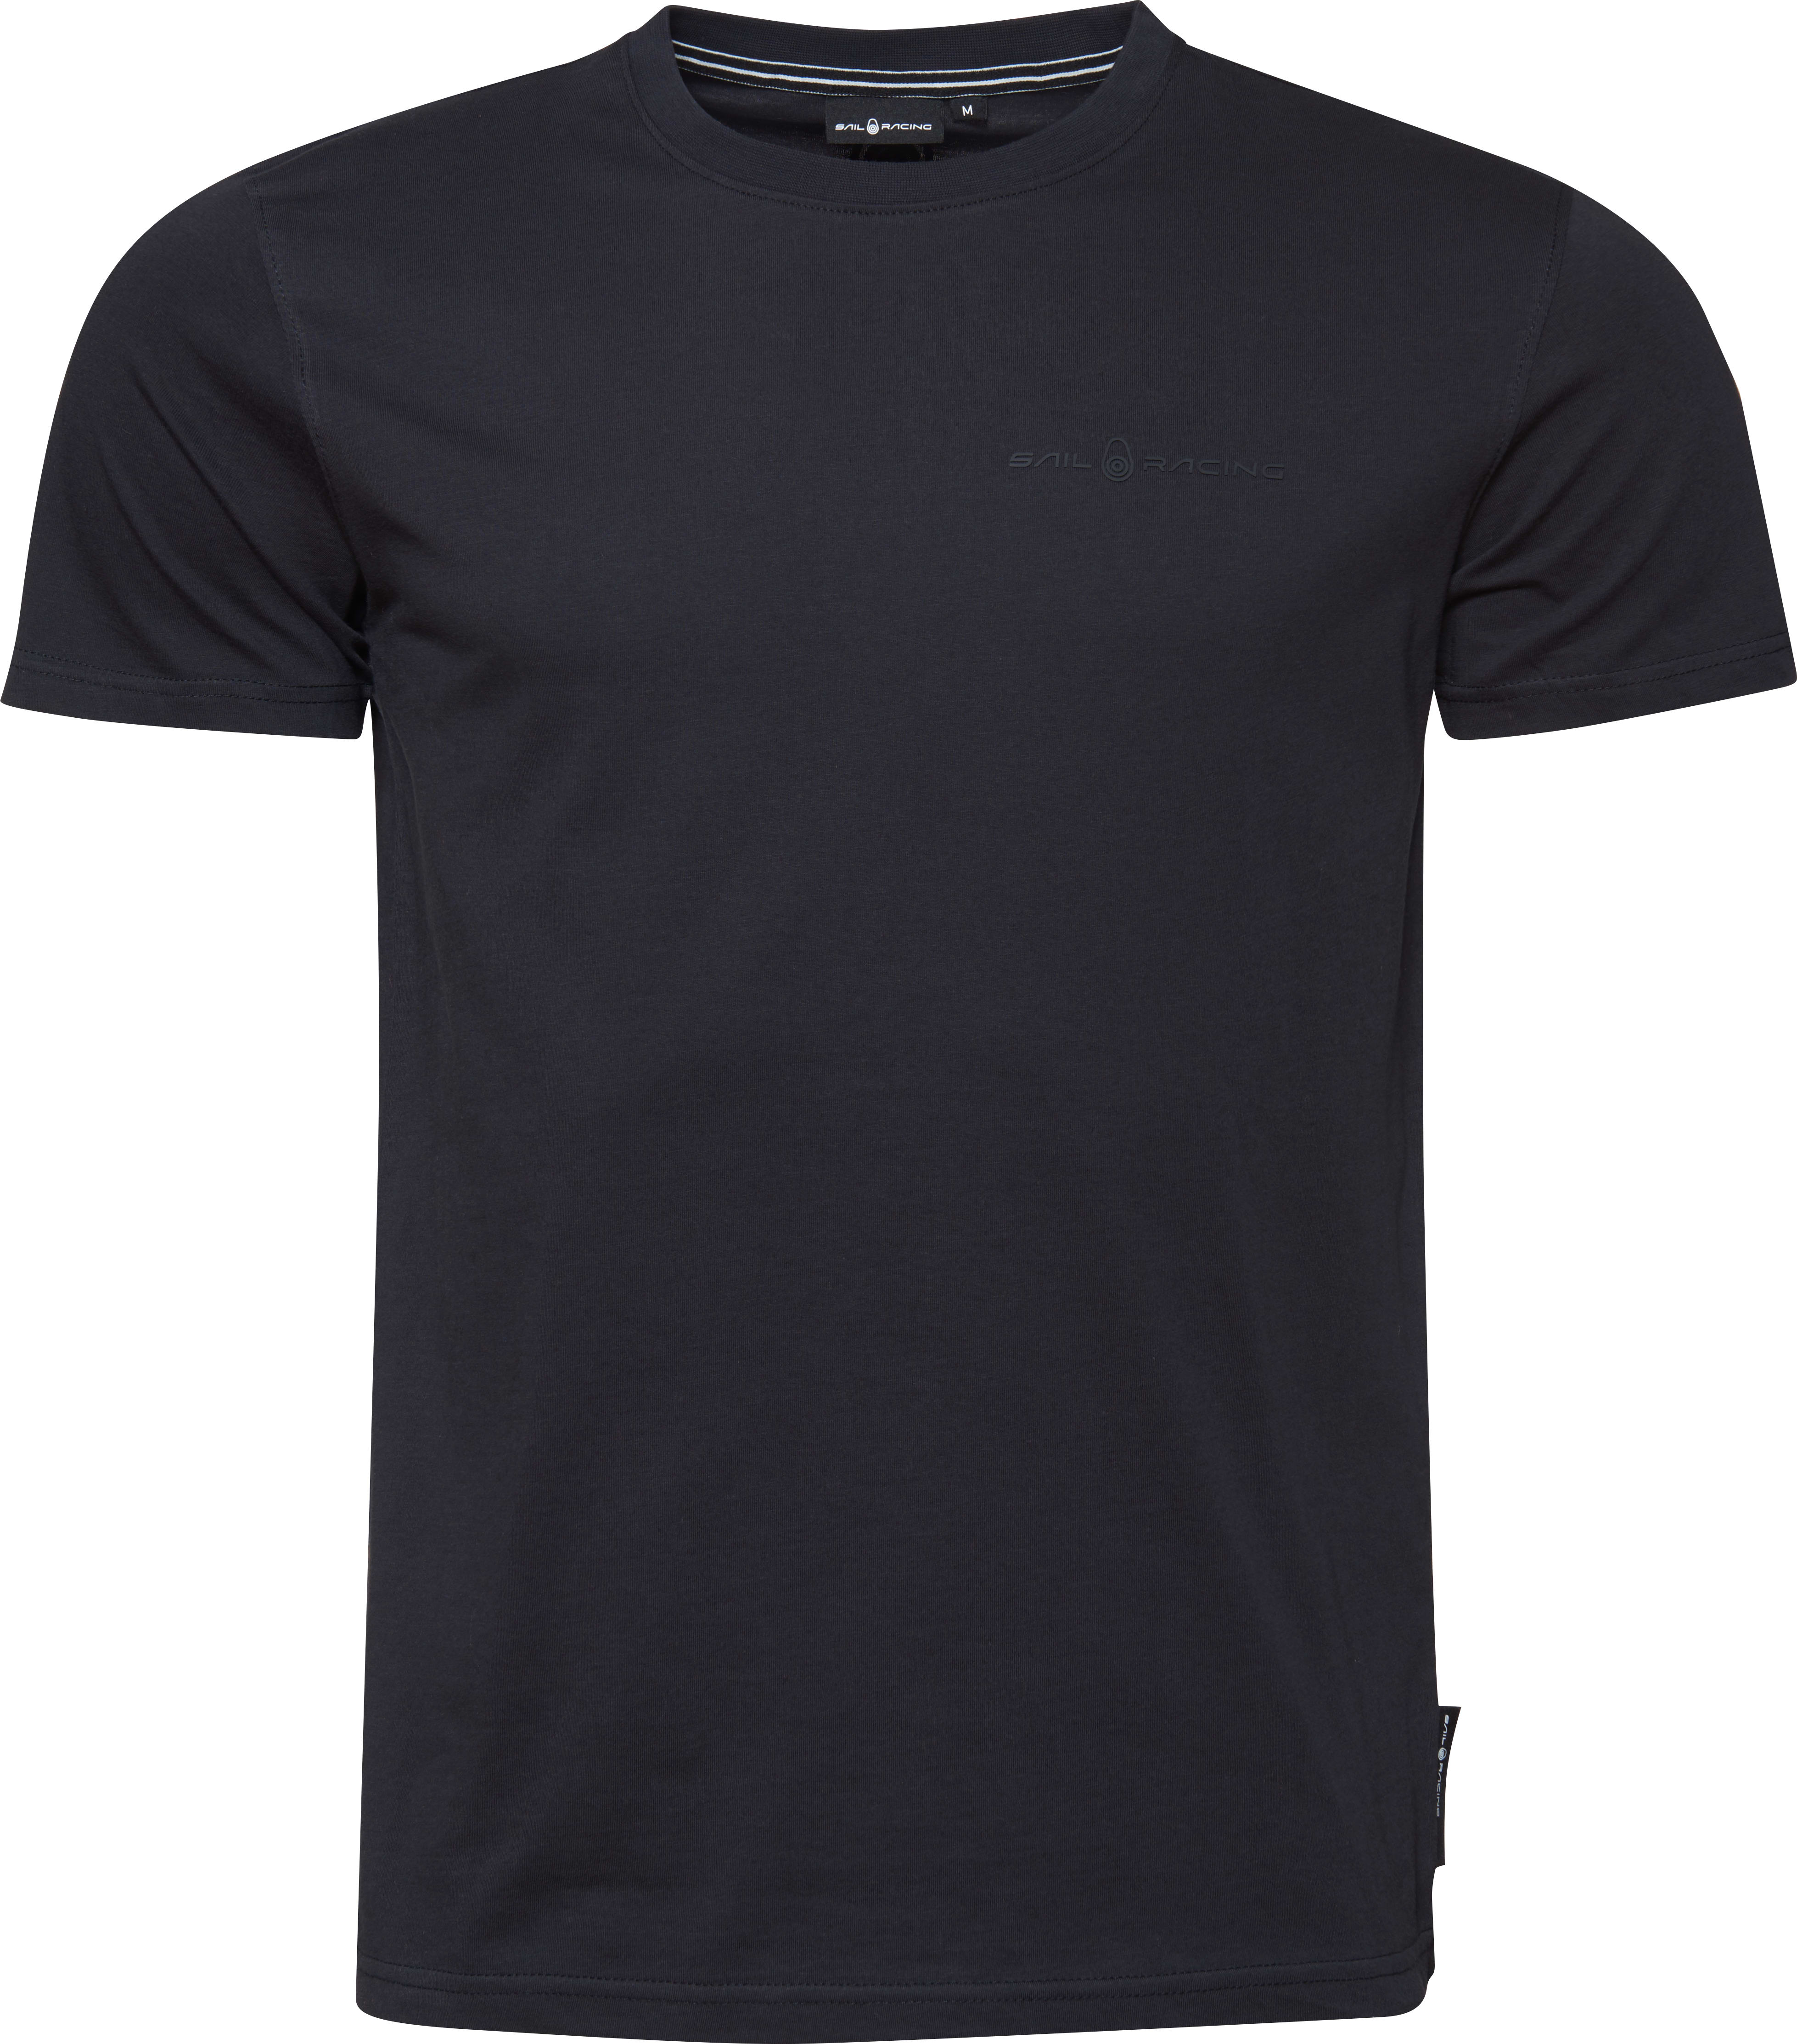 Buy Sail Racing Men's Bowman Logo Tee from Outnorth